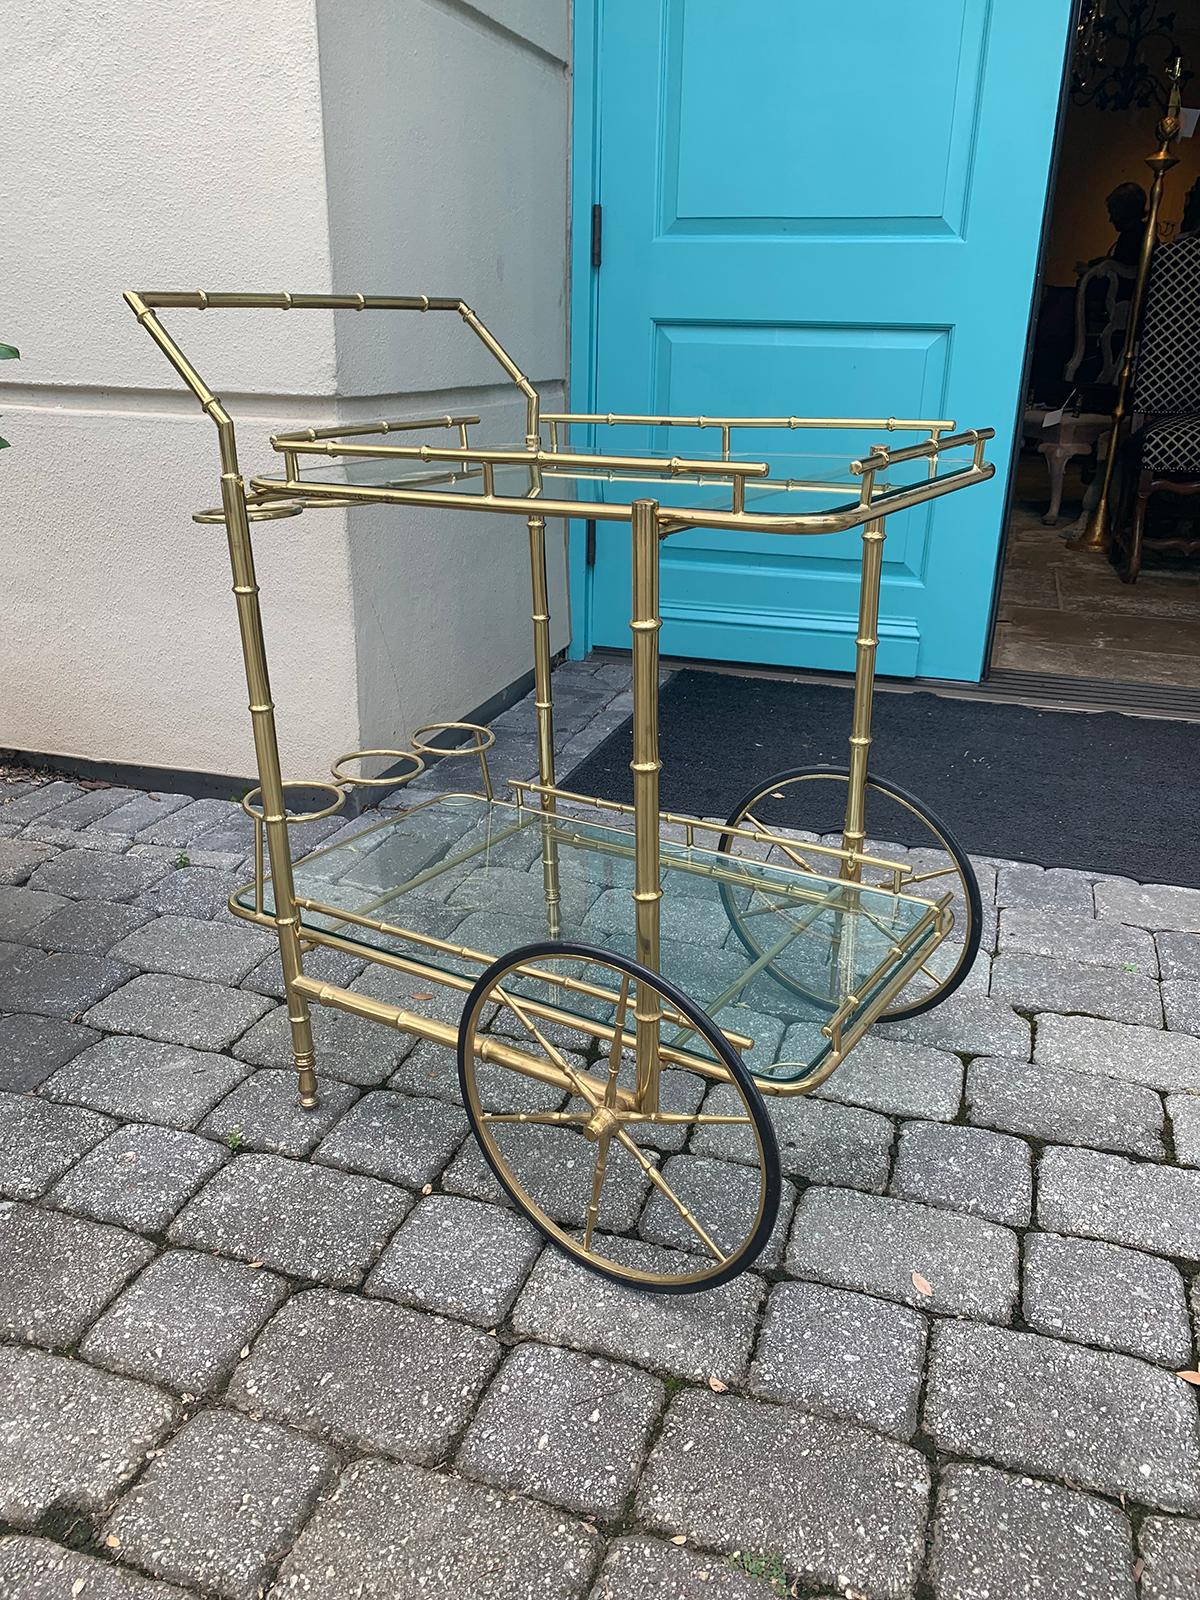 Italian brass faux bamboo bar cart with bottle carriers, circa 1970s
Two glass shelves
Glass is clear, turquoise showing is reflection of our front door.